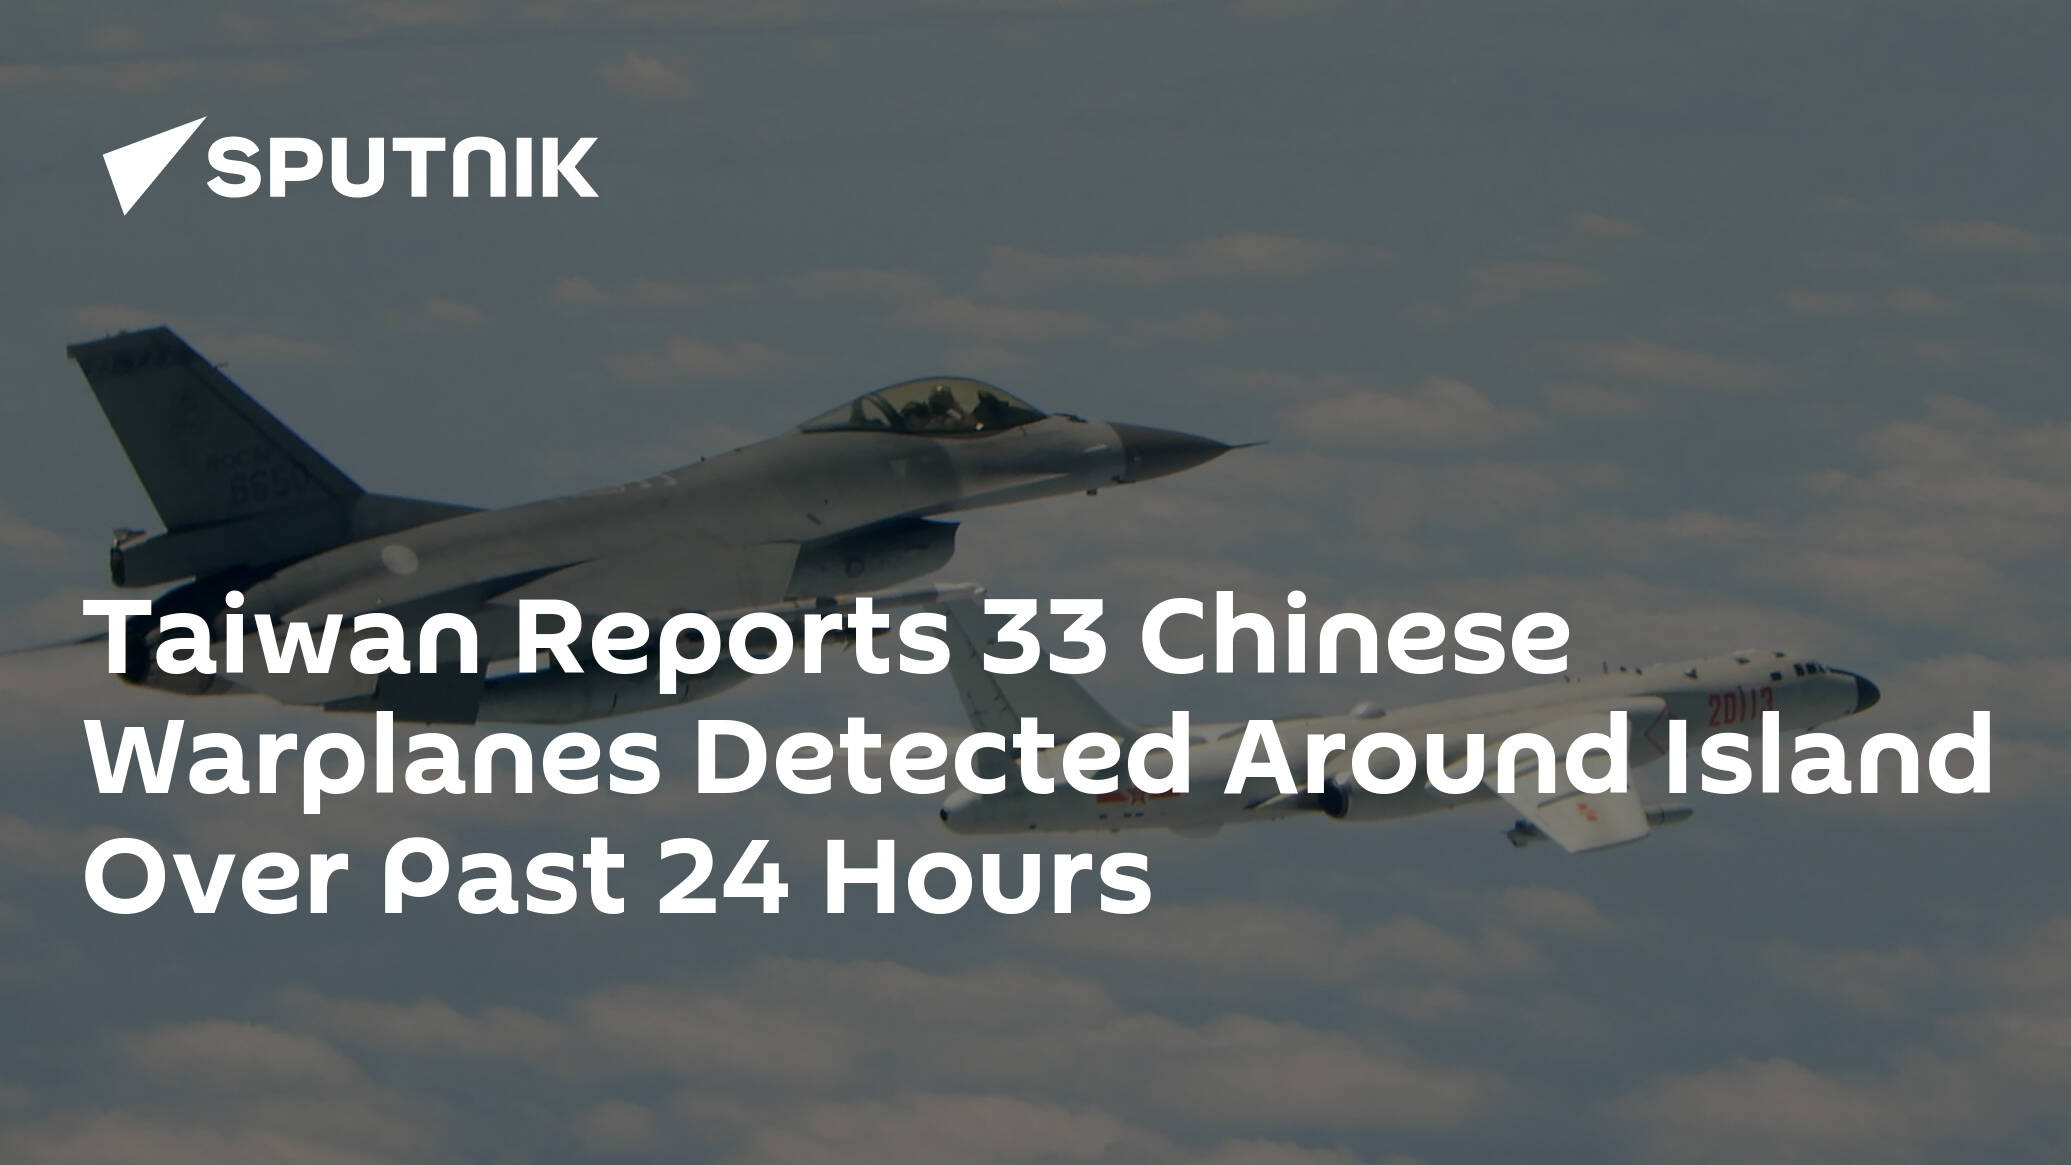 Taiwan Reports 33 Chinese Warplanes Detected Around Island Over Past 24 Hours